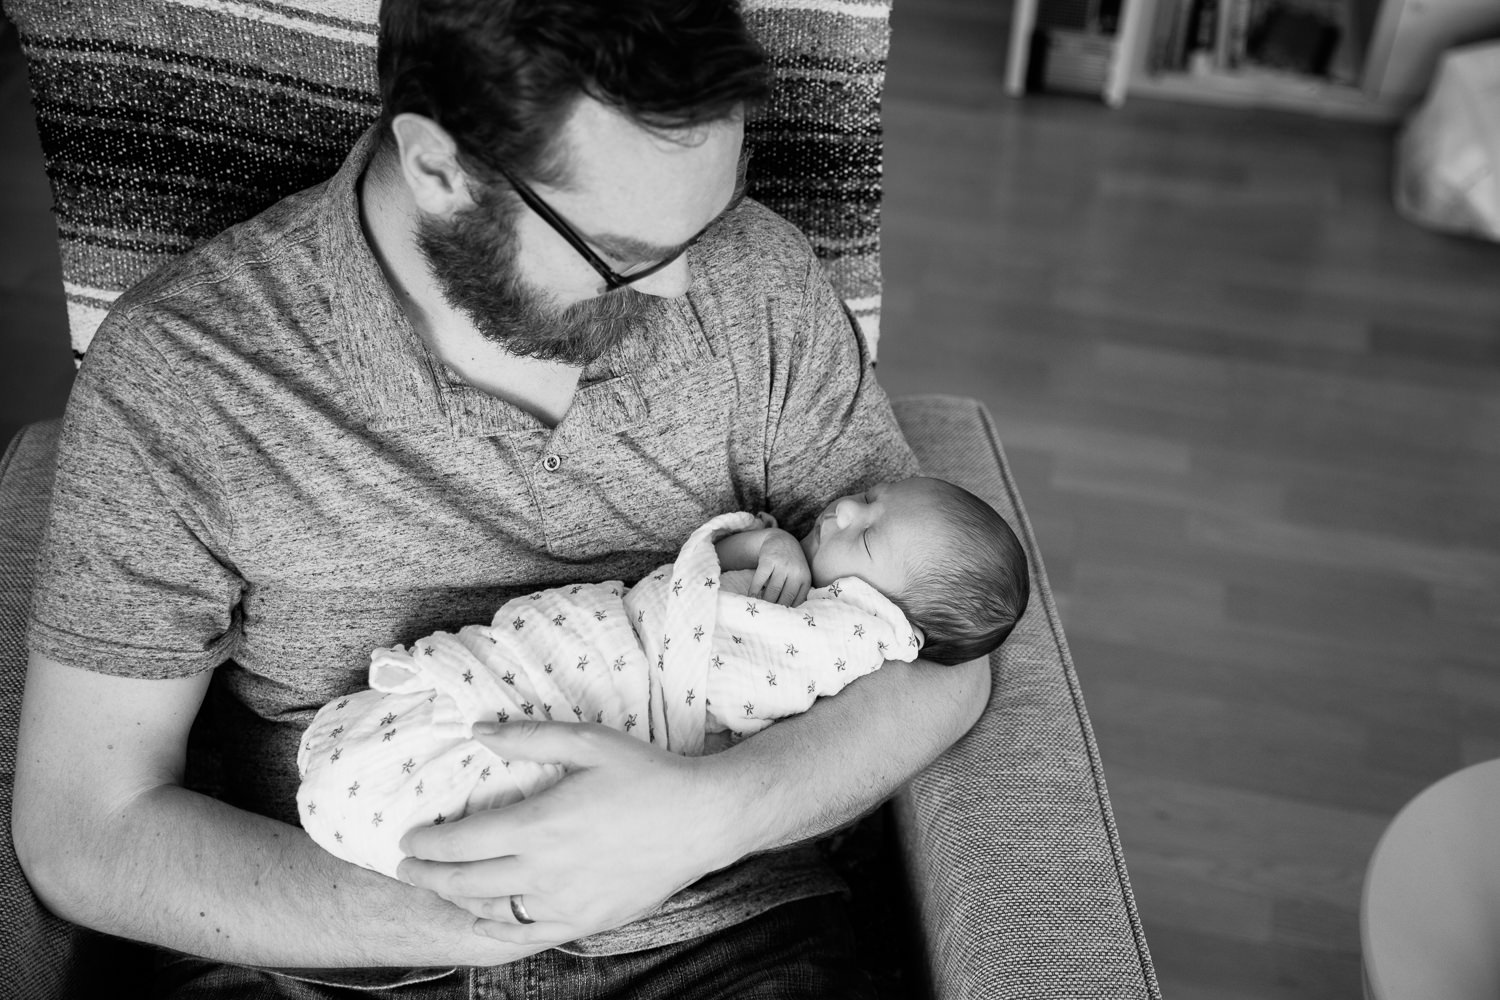 new father sitting in chair holding 2 week old baby boy in swaddle with dark hair, sleeping with hand near chin - Barrie In-Home Photography